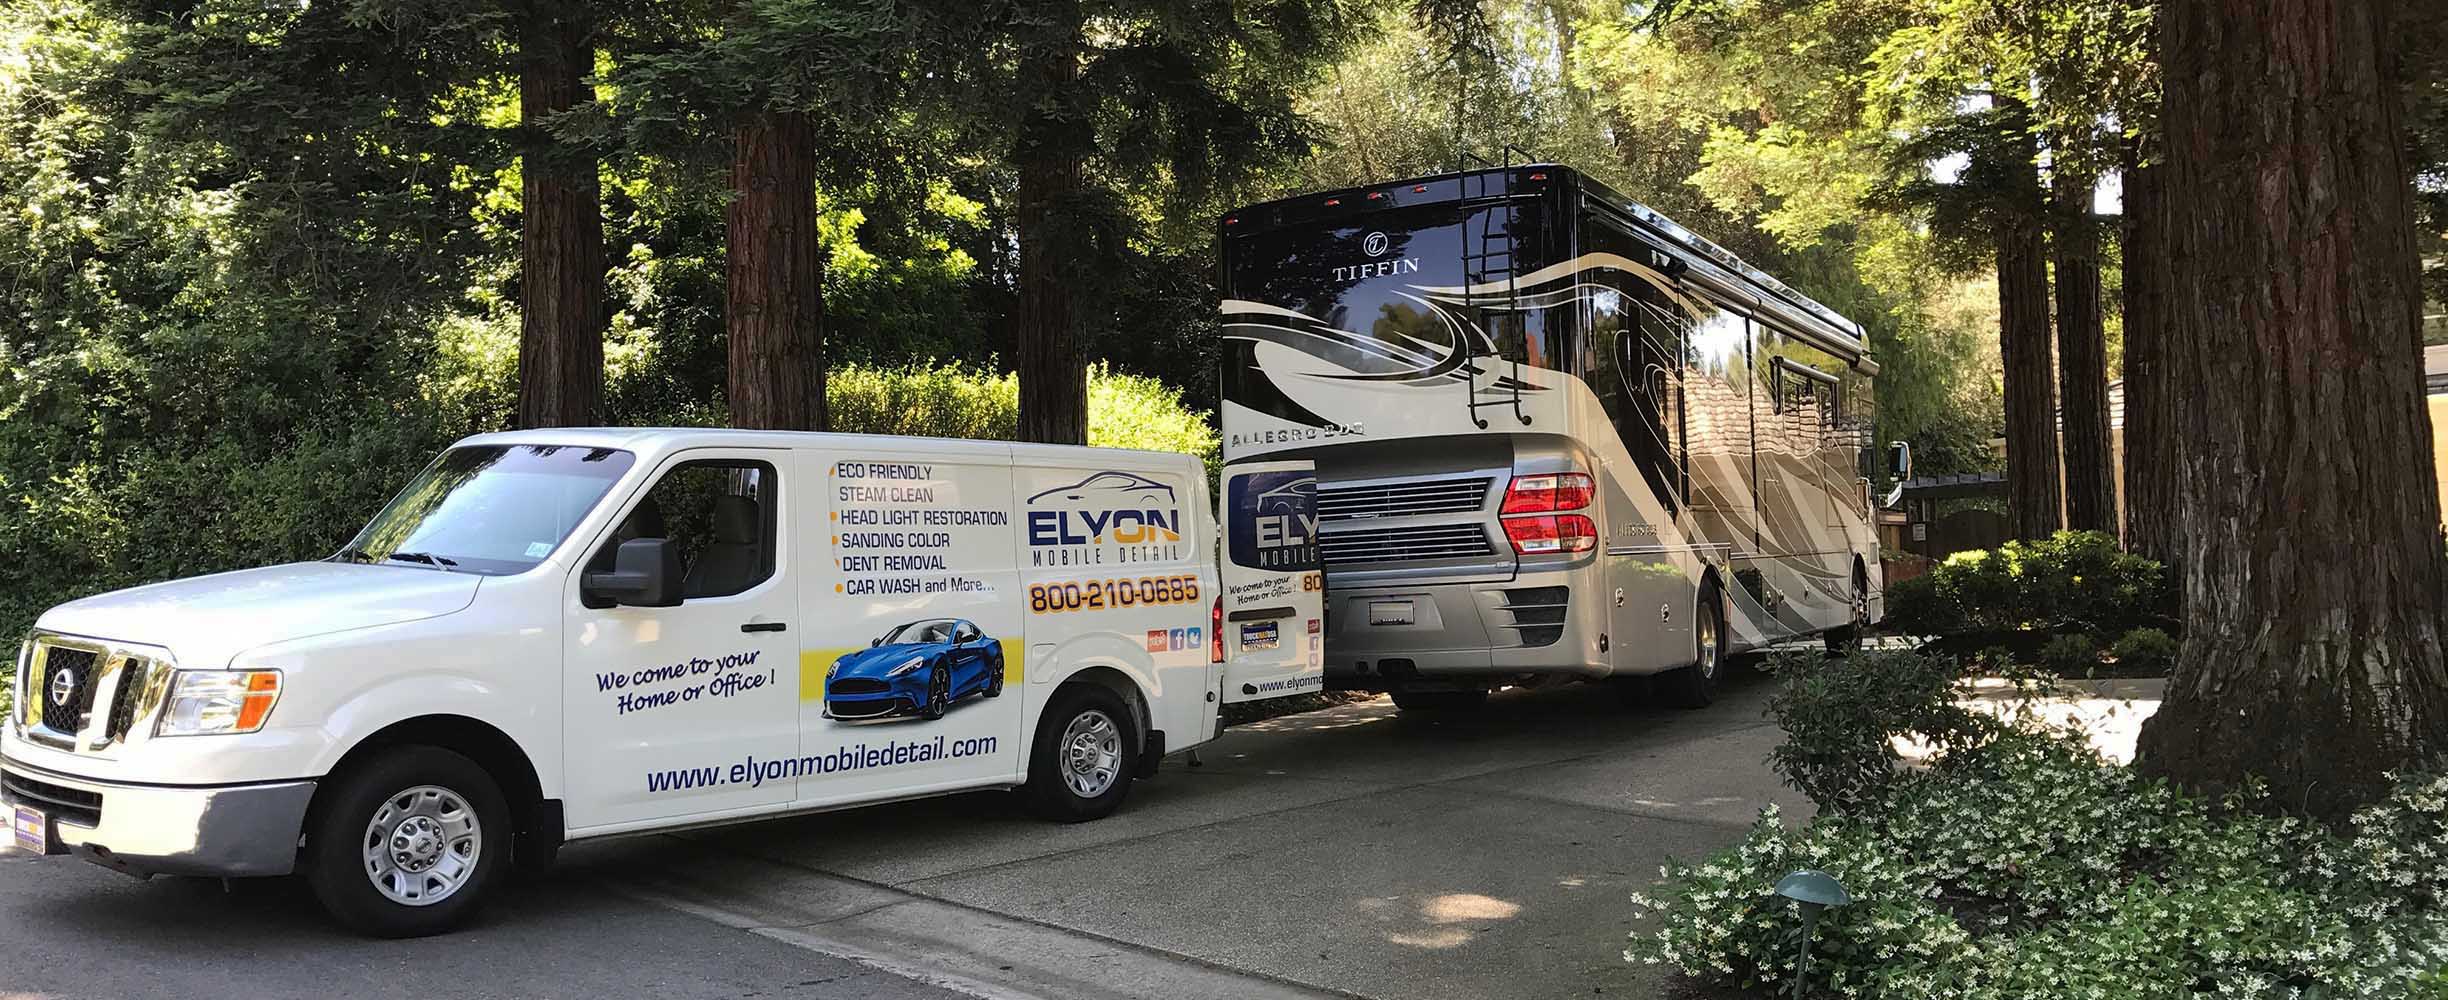 Mobile Auto Detailing for a motorhome in Woodside, San Fancisco Bay Area